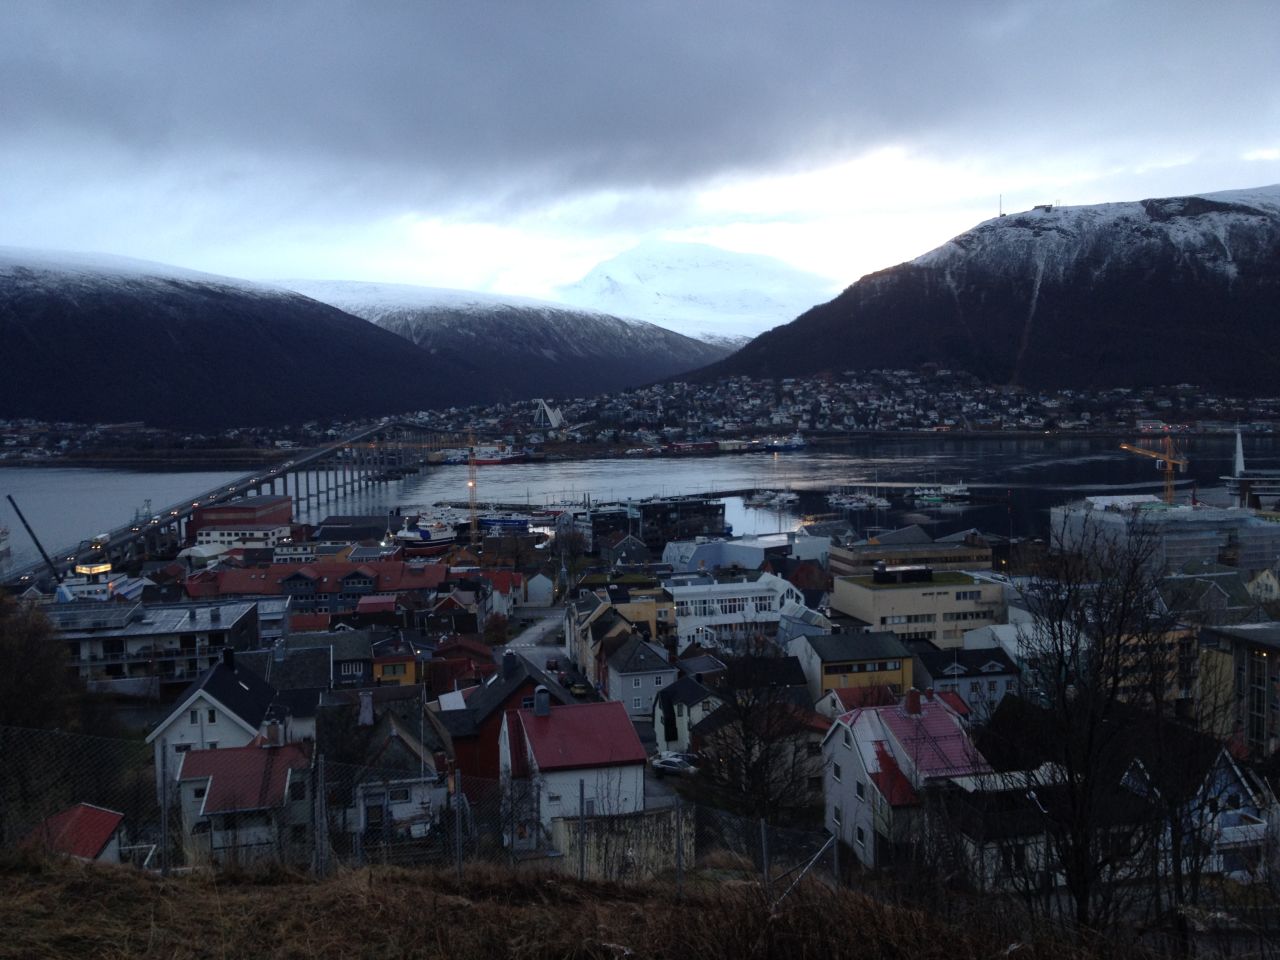 The work is part of the PharmaSea project, which brings together researchers from the UK, Belgium, Spain, Ireland, Germany, Italy, Denmark and the Norwegian town of Tromso, pictured. 